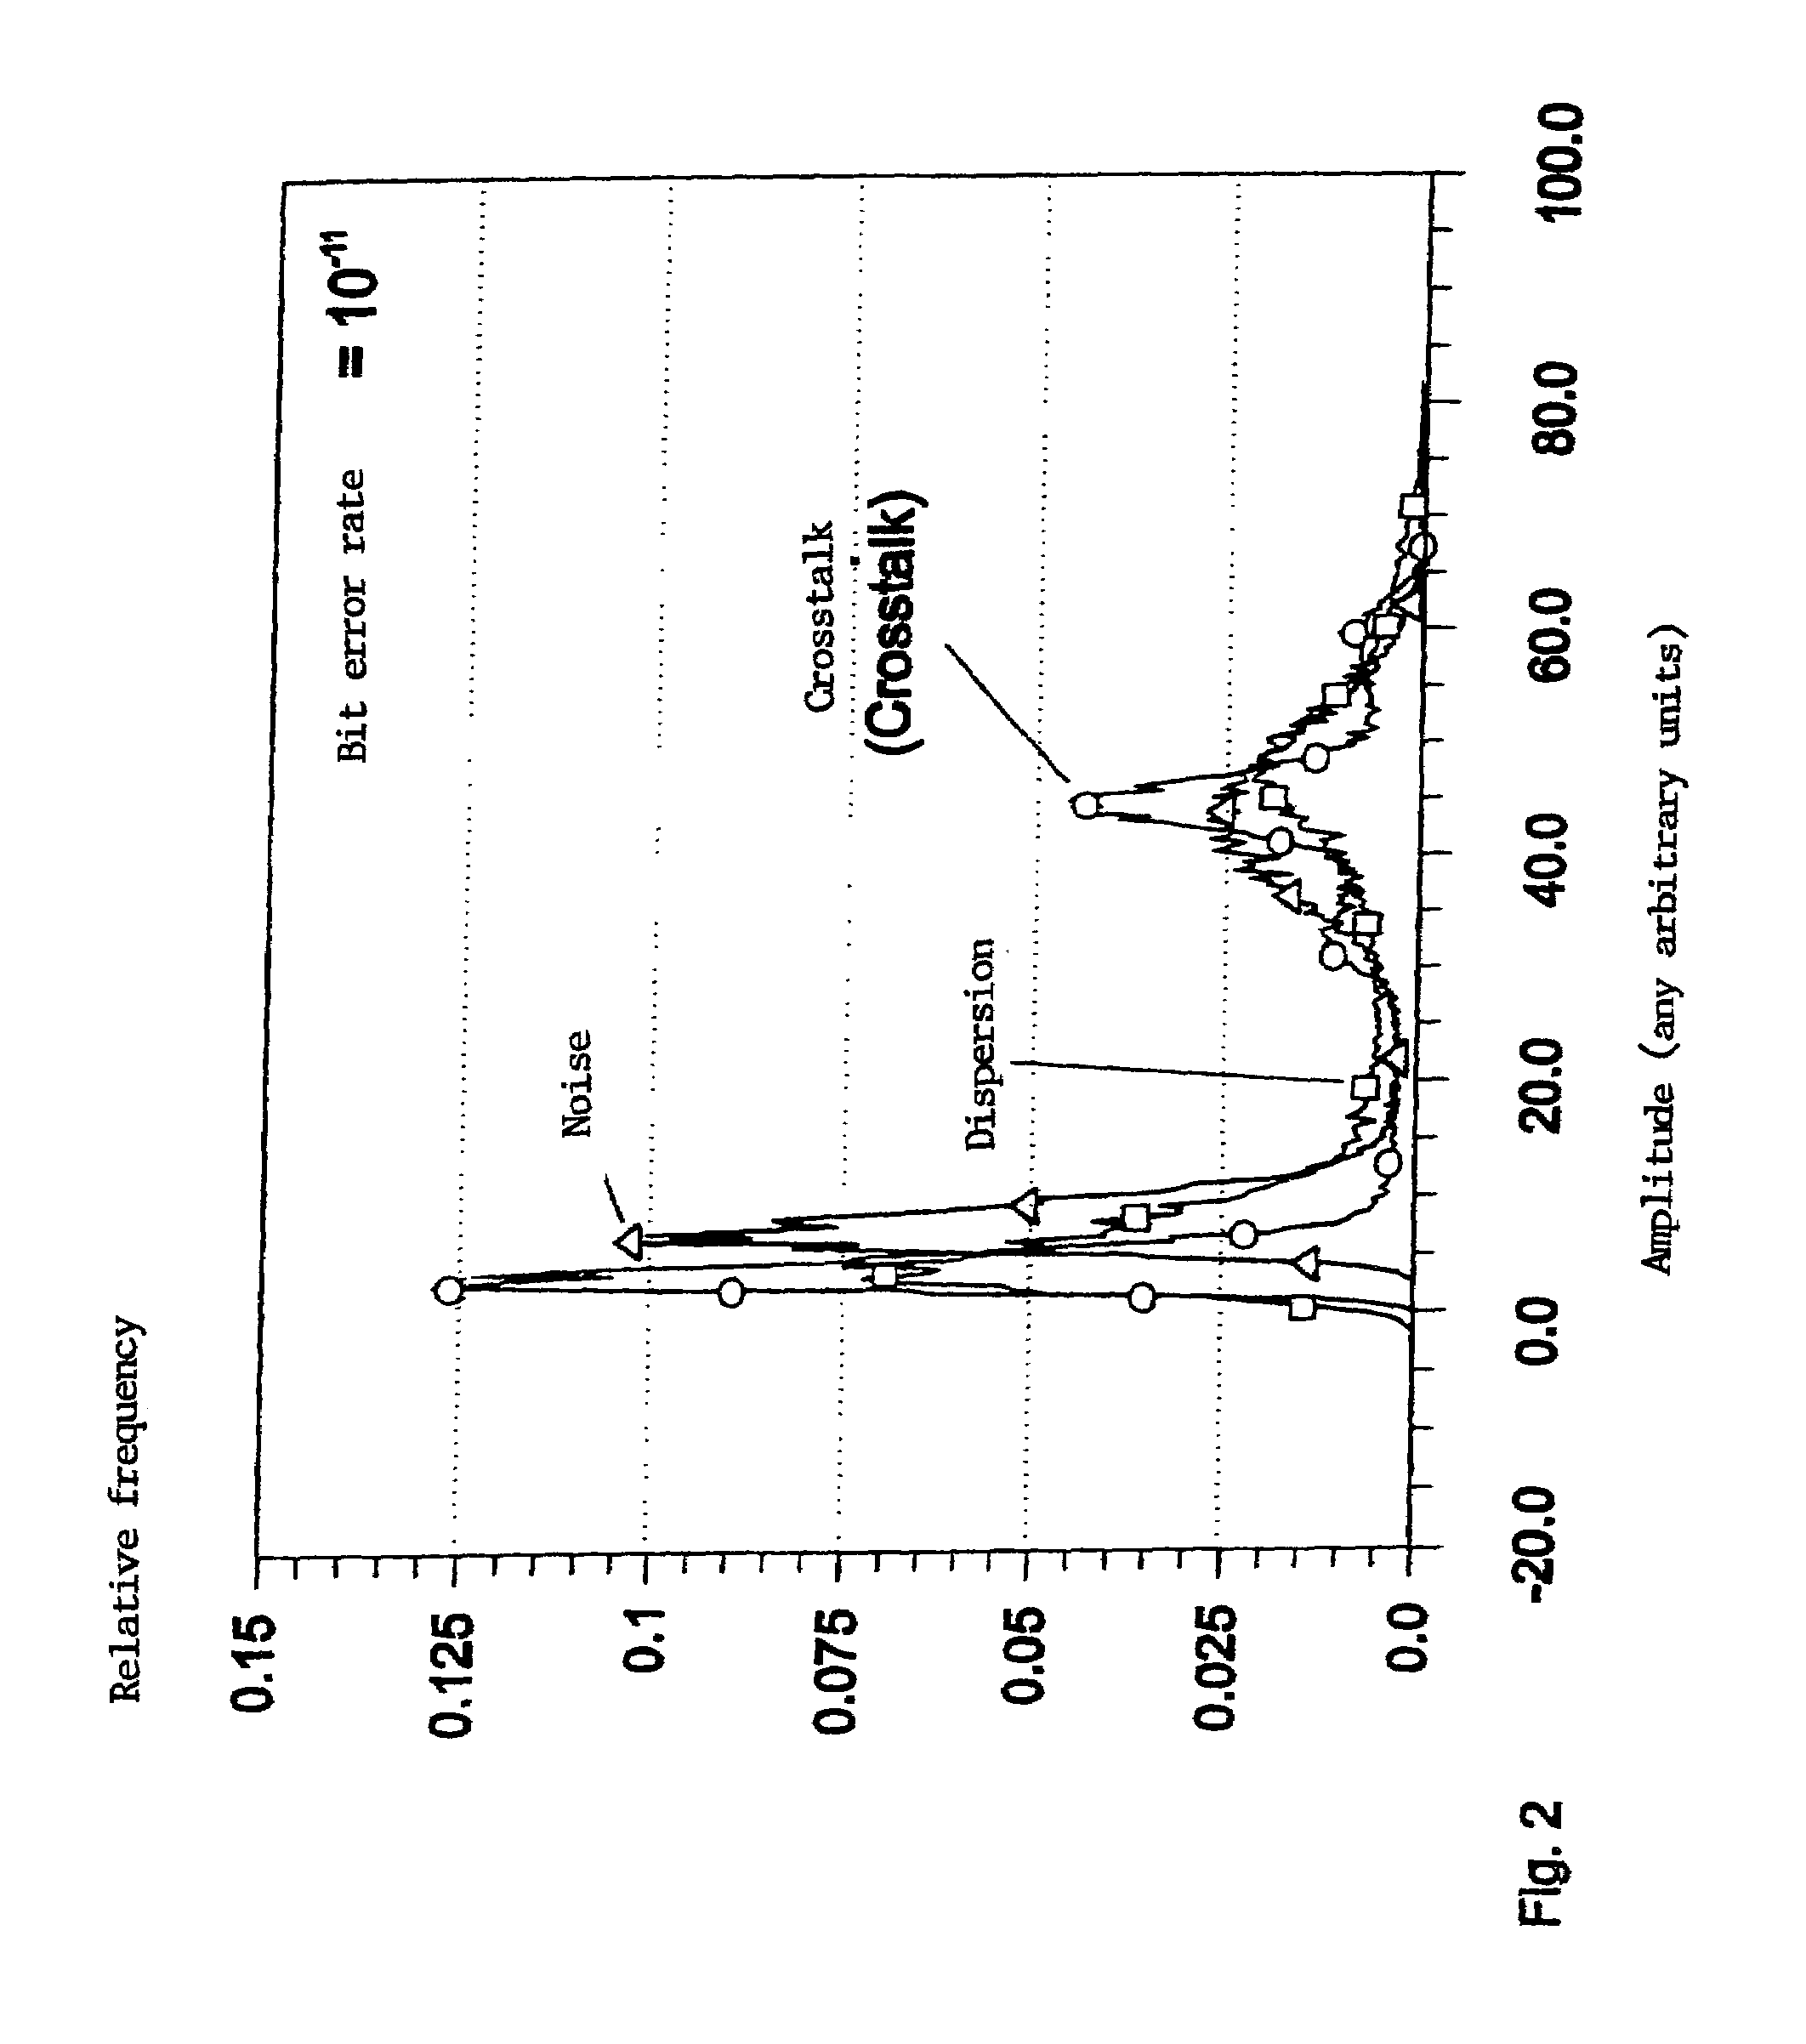 Method for monitoring the transmission quality of an optical transmission system, in particular of an optical wavelength-division multiplex network